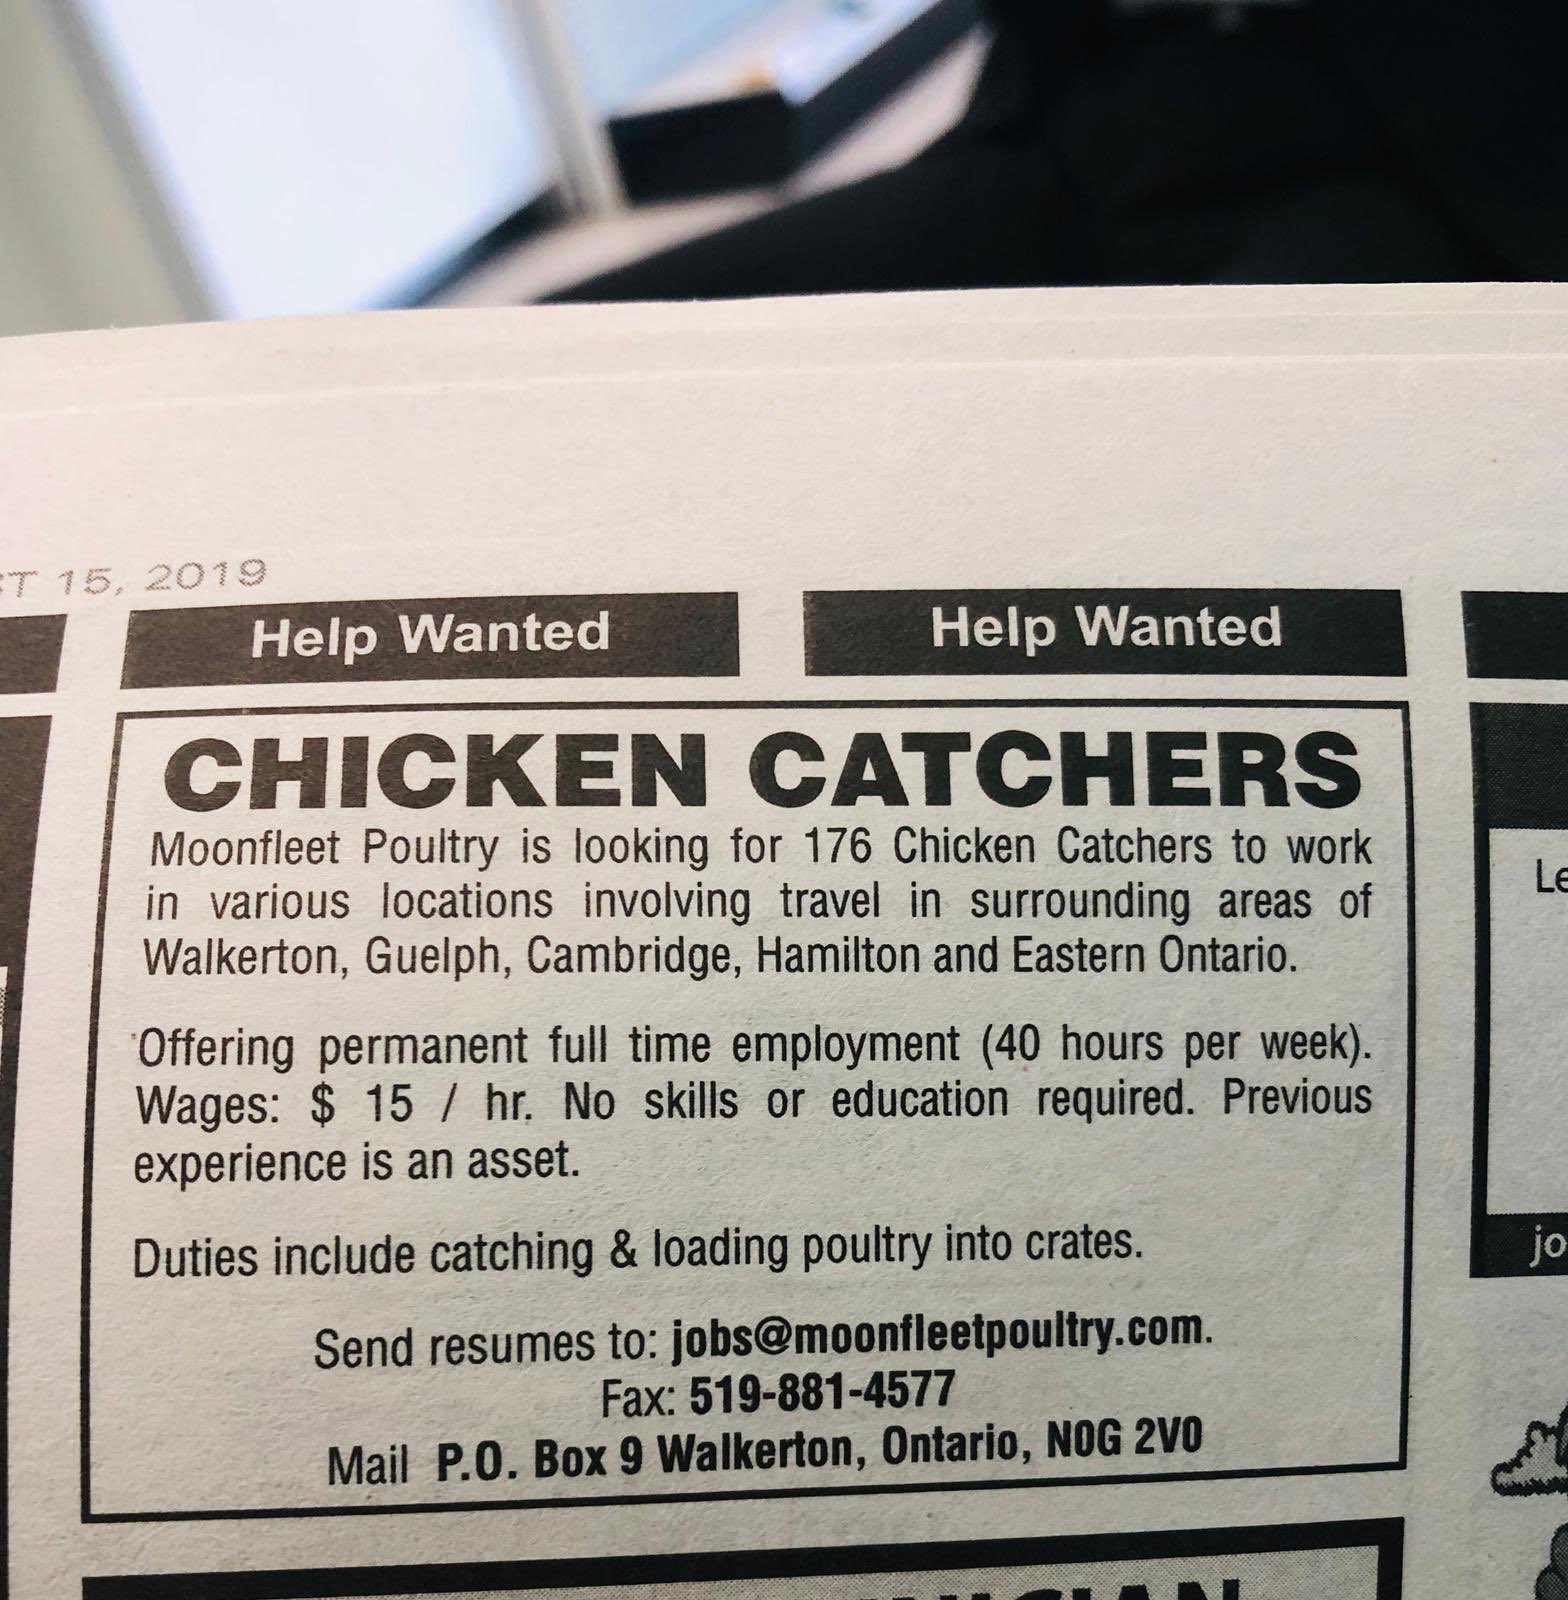 Nnayelugo on X: There was a thread I saw about a Nigerian who got a job as  a chicken catcher in Maple land. Well, this is an advert in a paper for